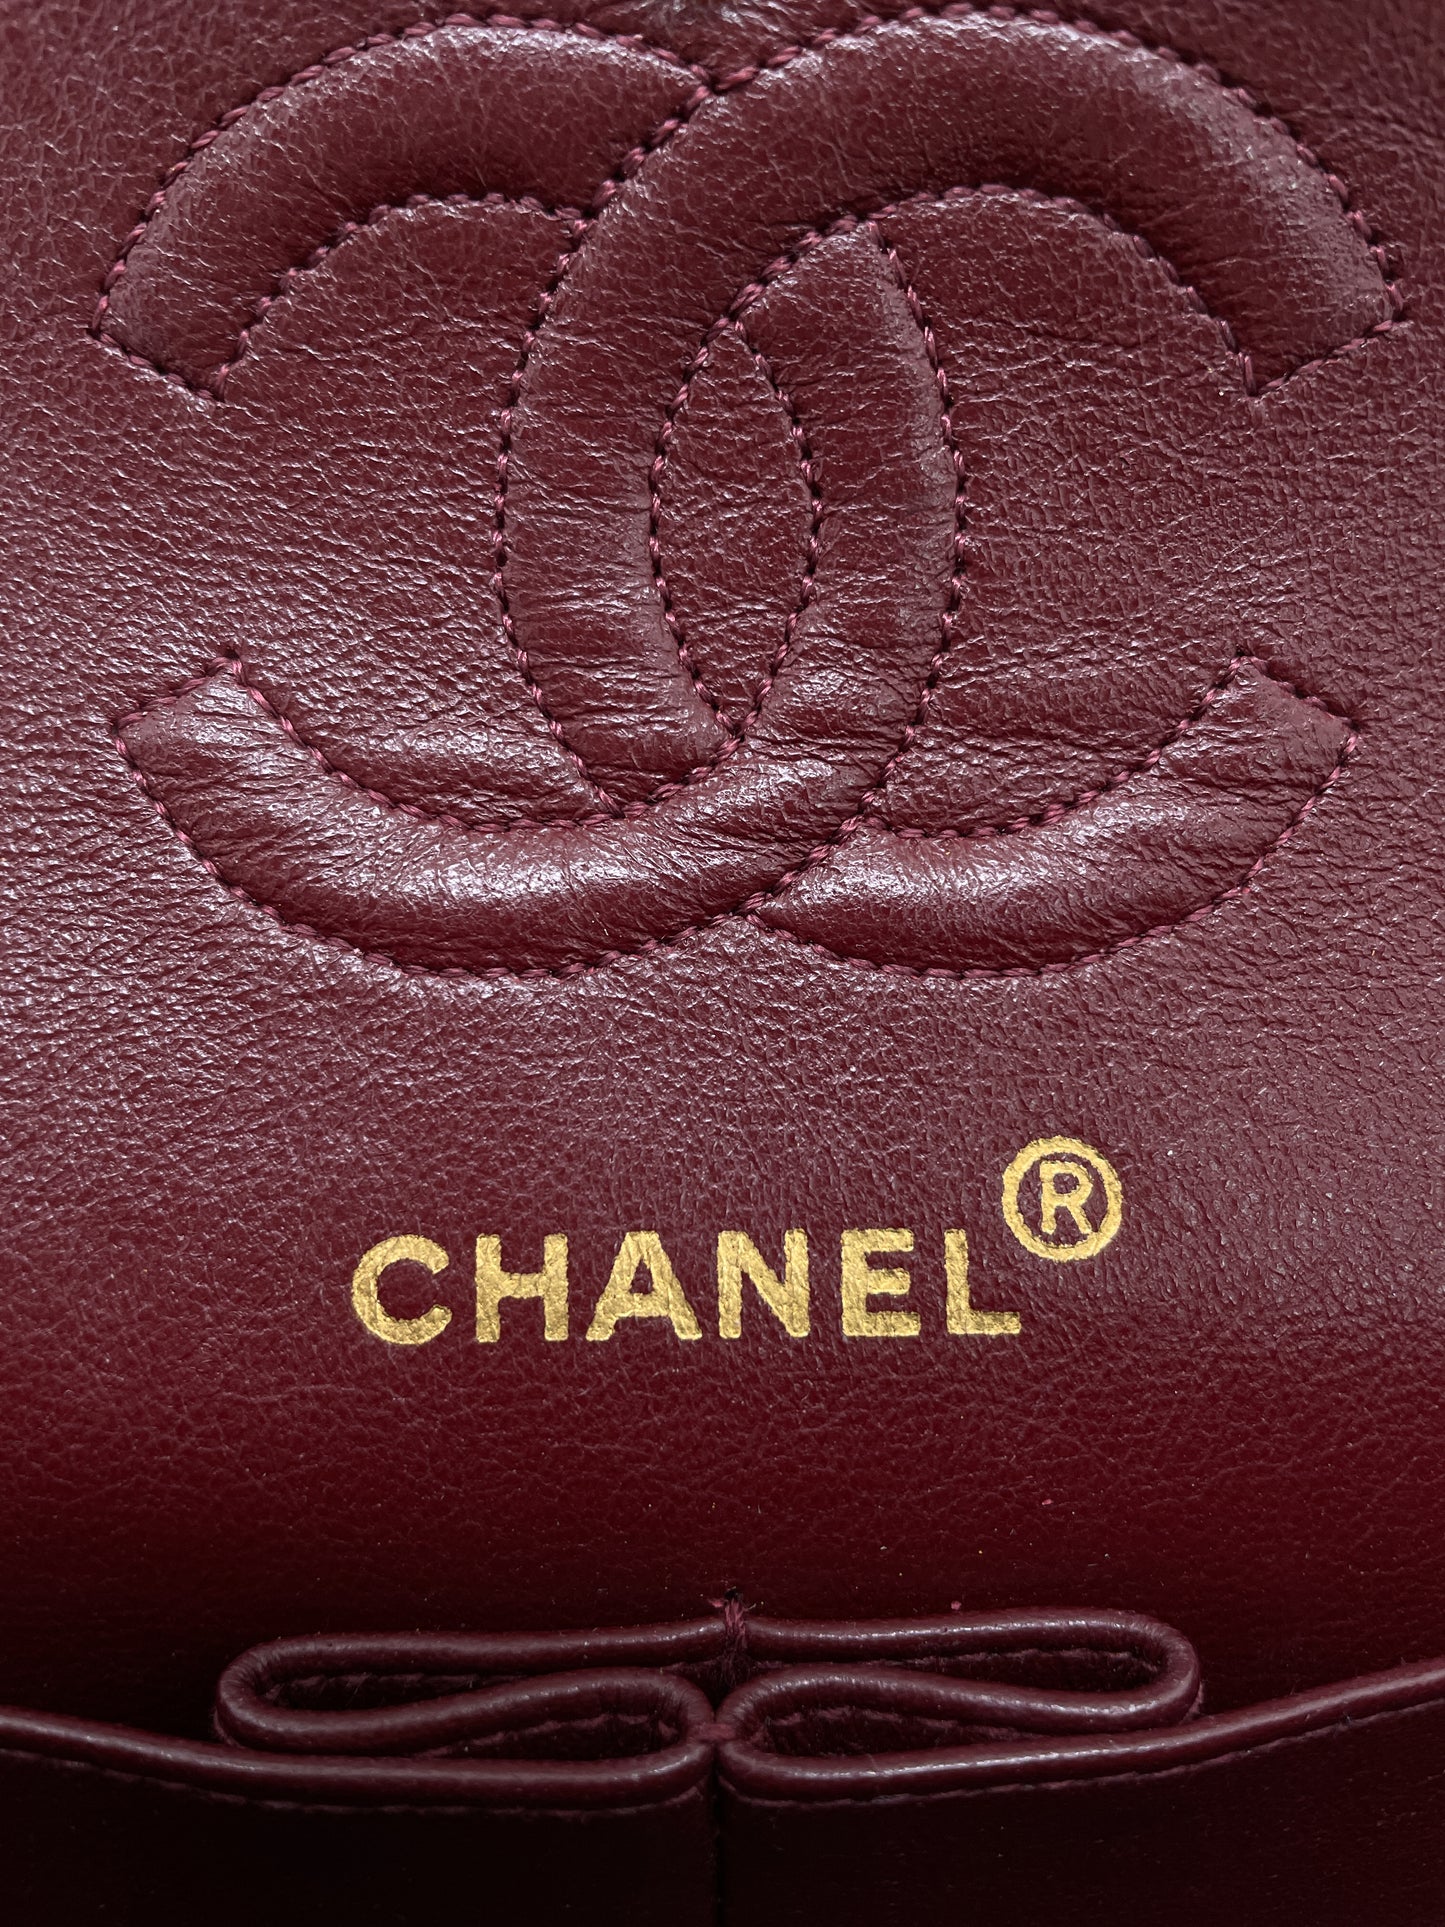 CHANEL VINTAGE SMALL CLASSIC FLAP